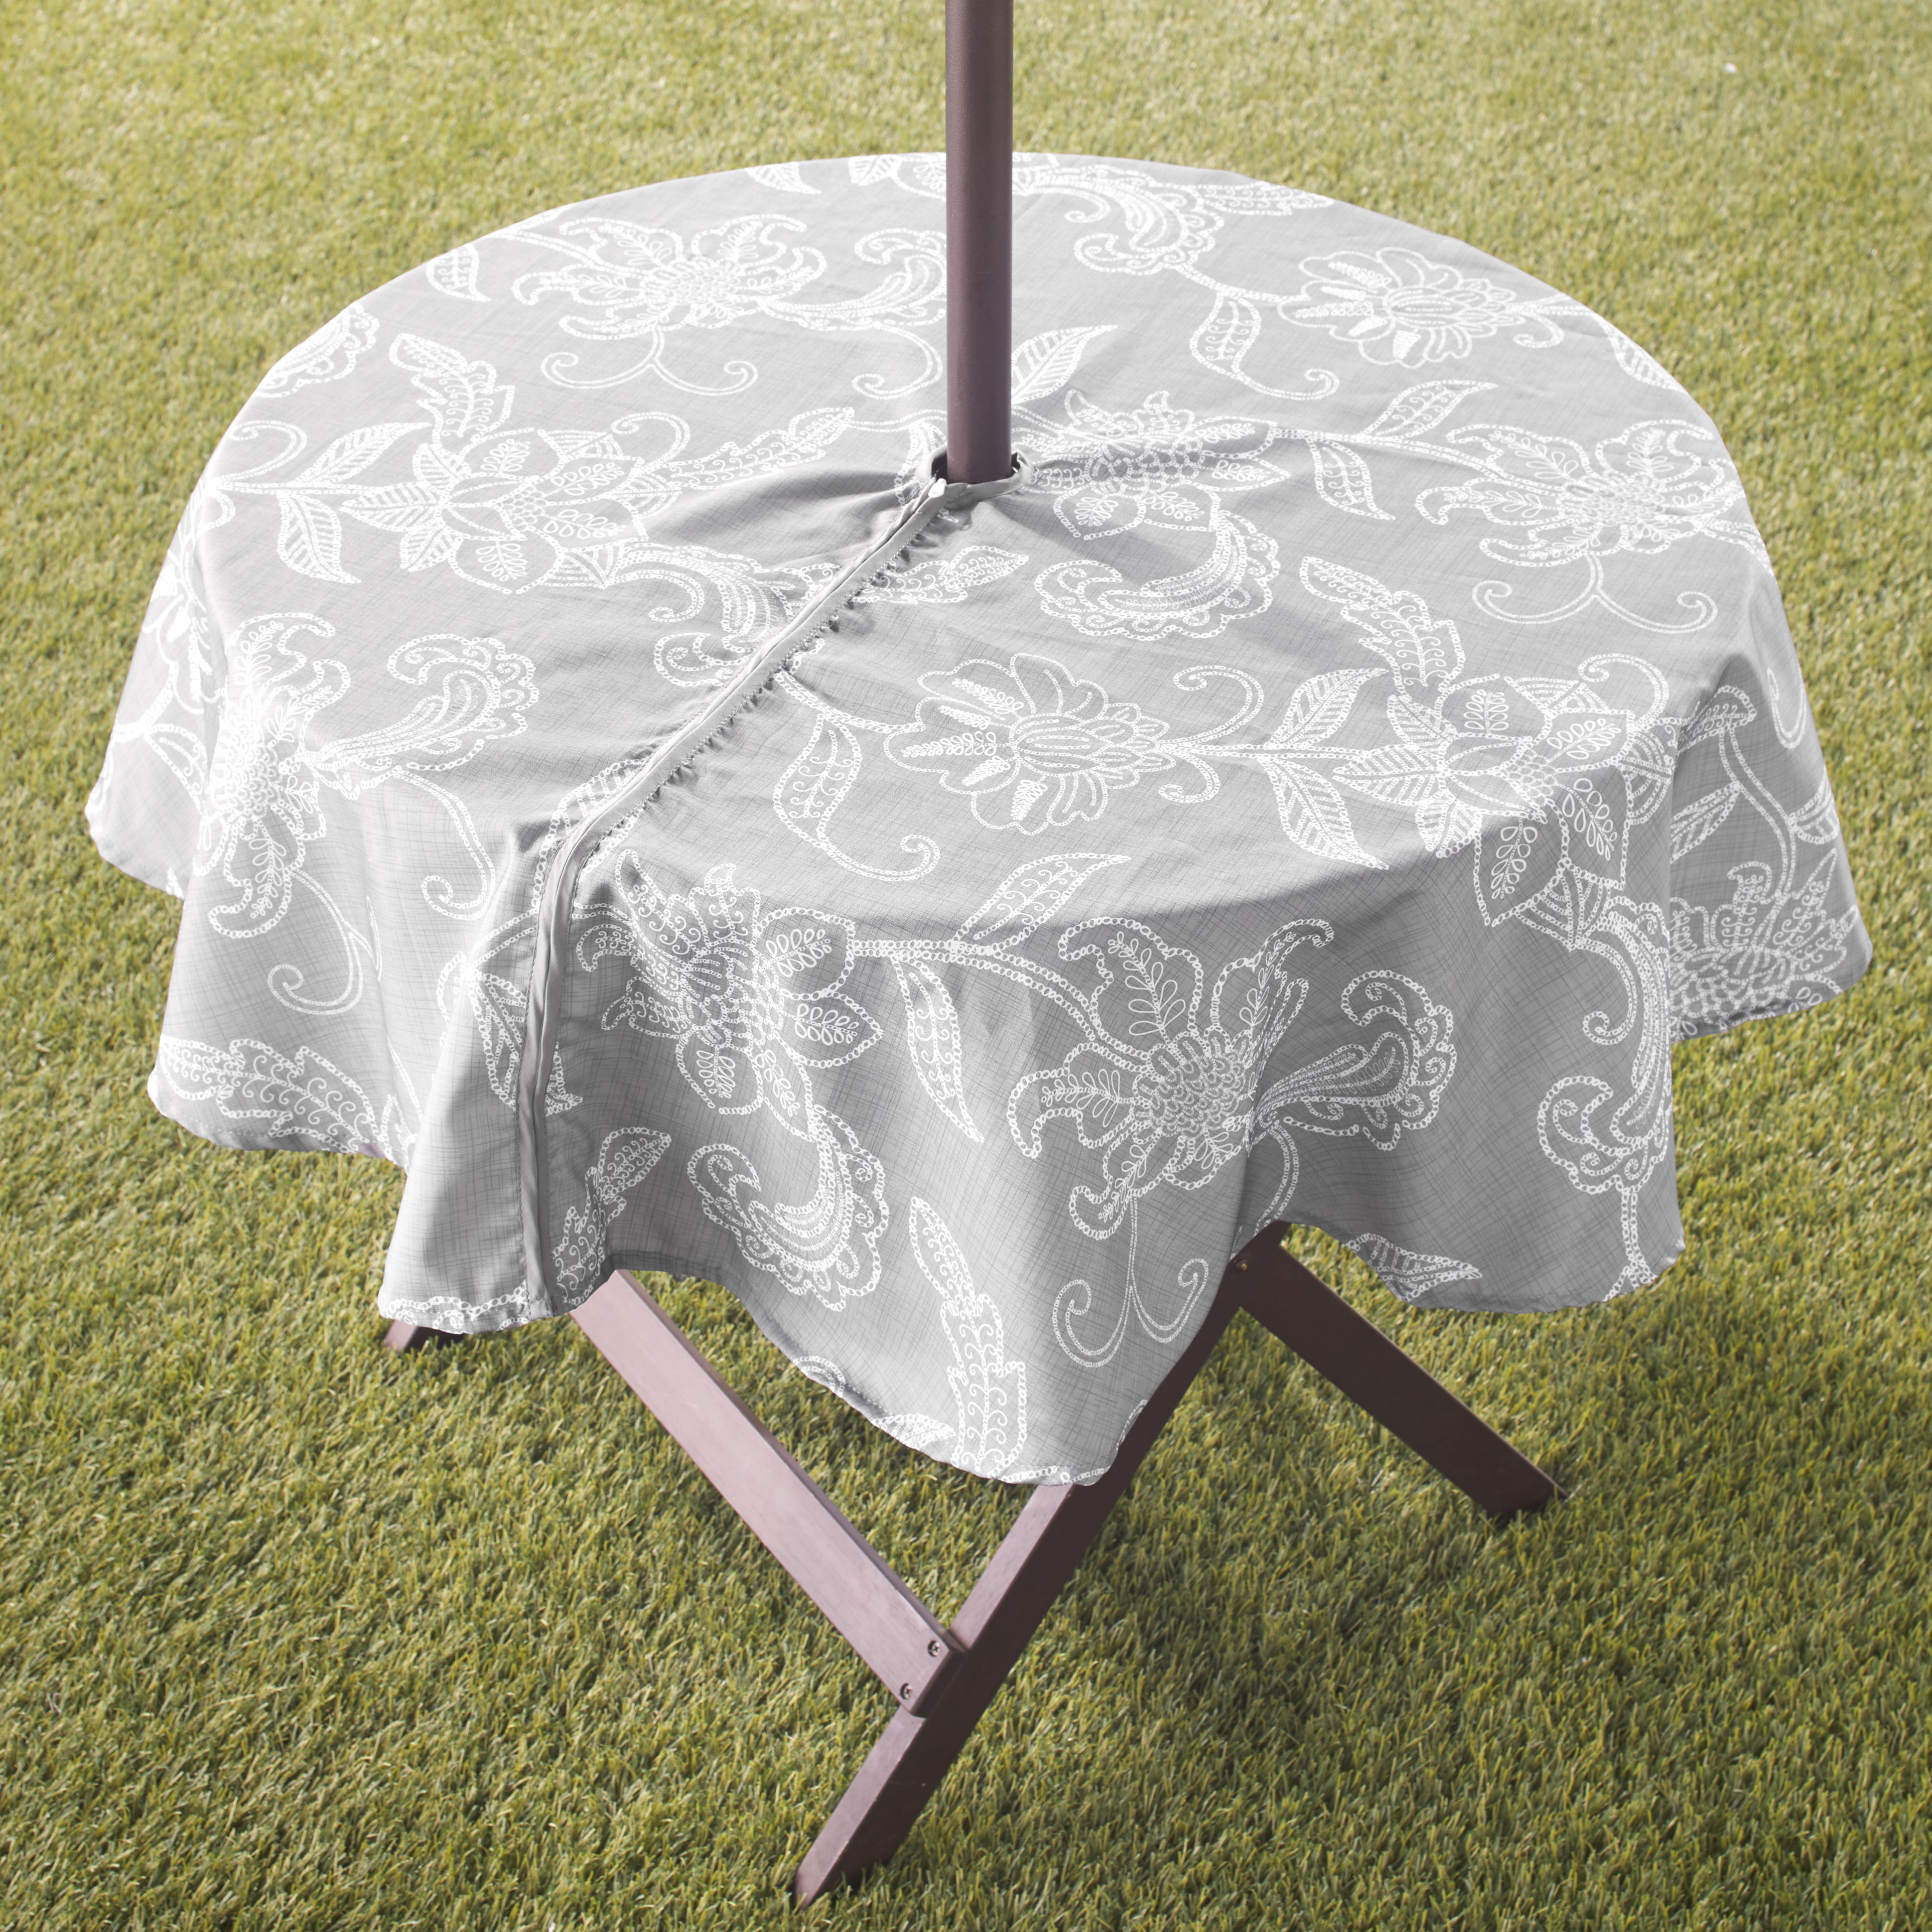 Outdoor Tablecloth With Umbrella Hole, White Round Outdoor Tablecloth With Umbrella Hole